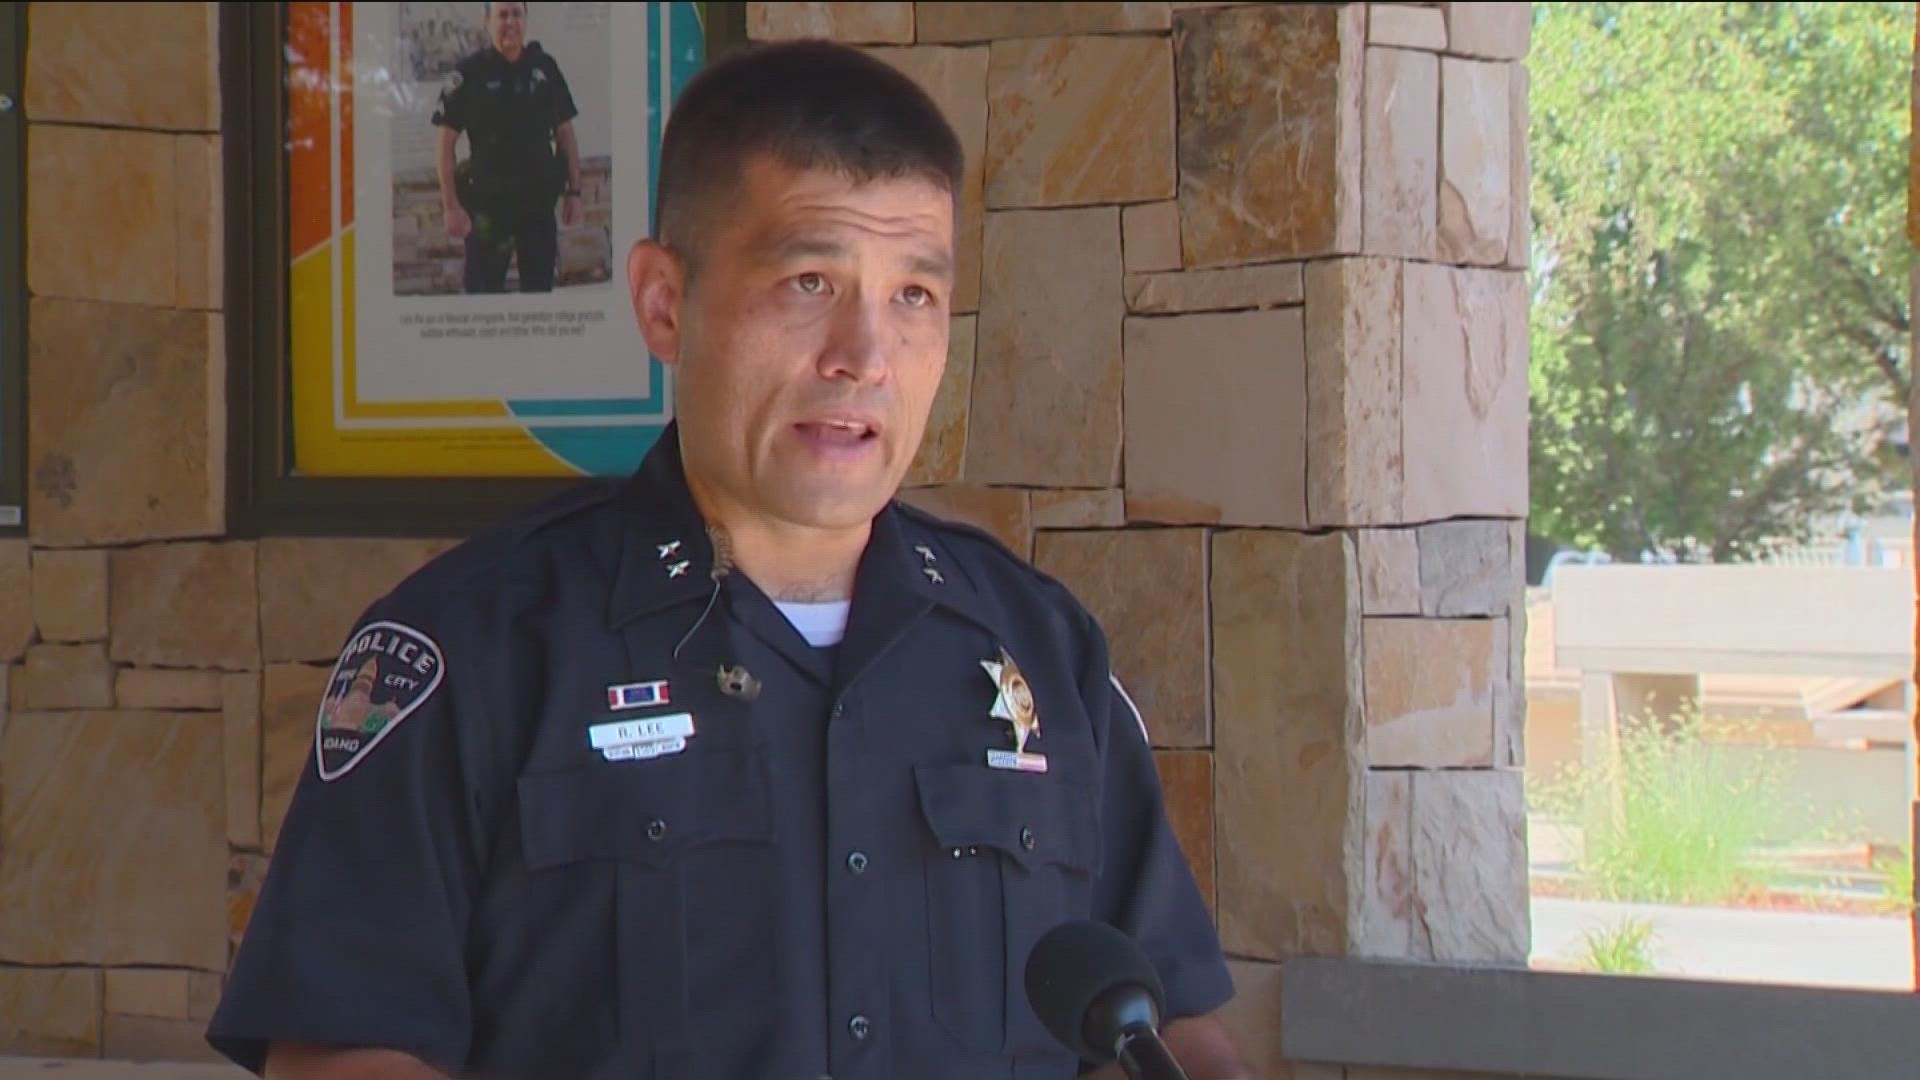 Boise Police Department Chief Ryan Lee resigned from his position on Friday, at the request of Boise Mayor Lauren McLean, effective Oct. 14.